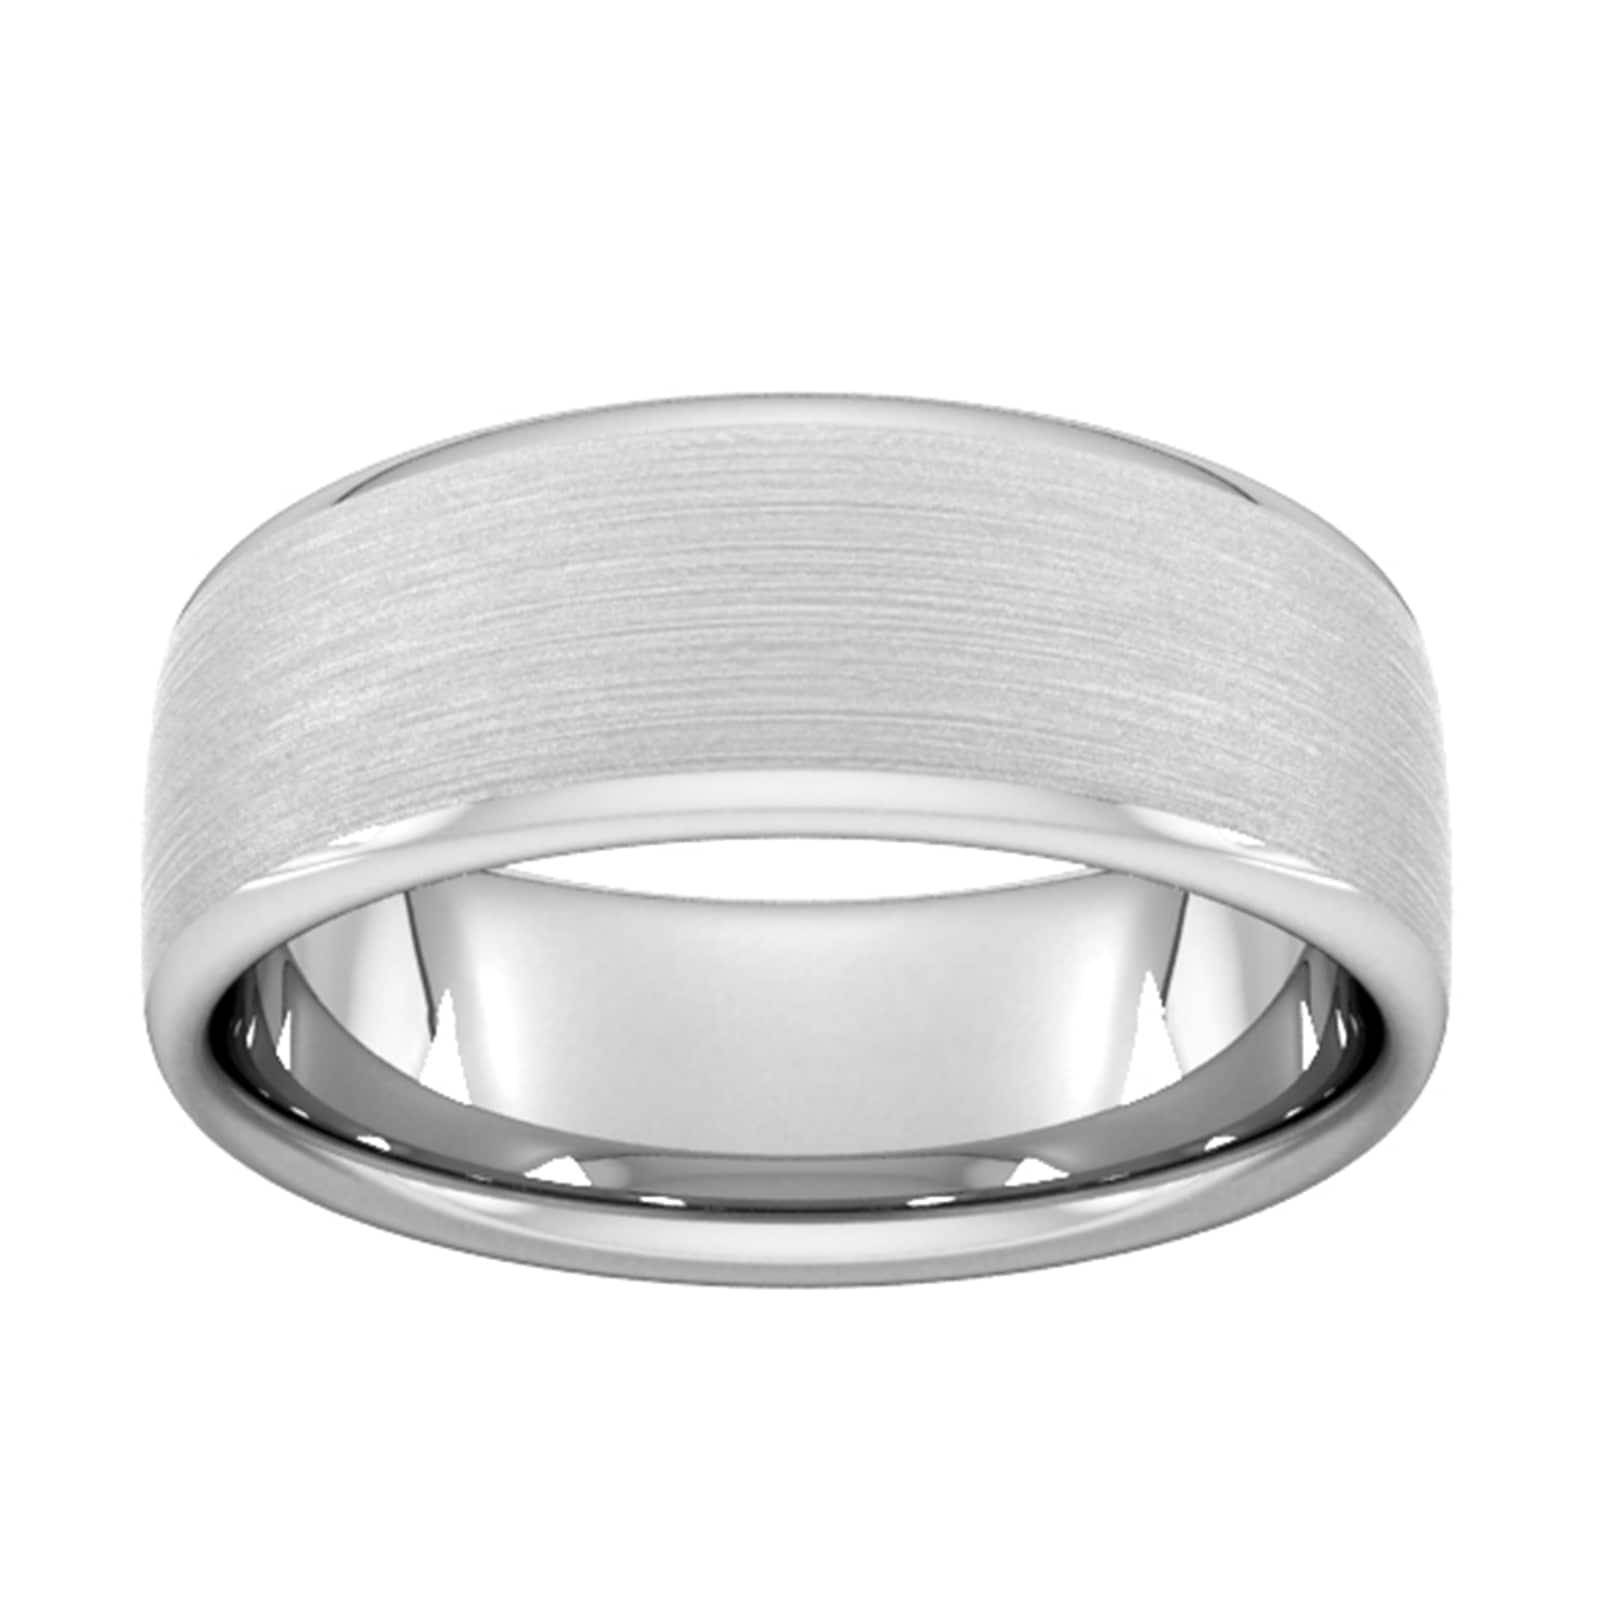 8mm Slight Court Extra Heavy Matt Finished Wedding Ring In 18 Carat White Gold - Ring Size L